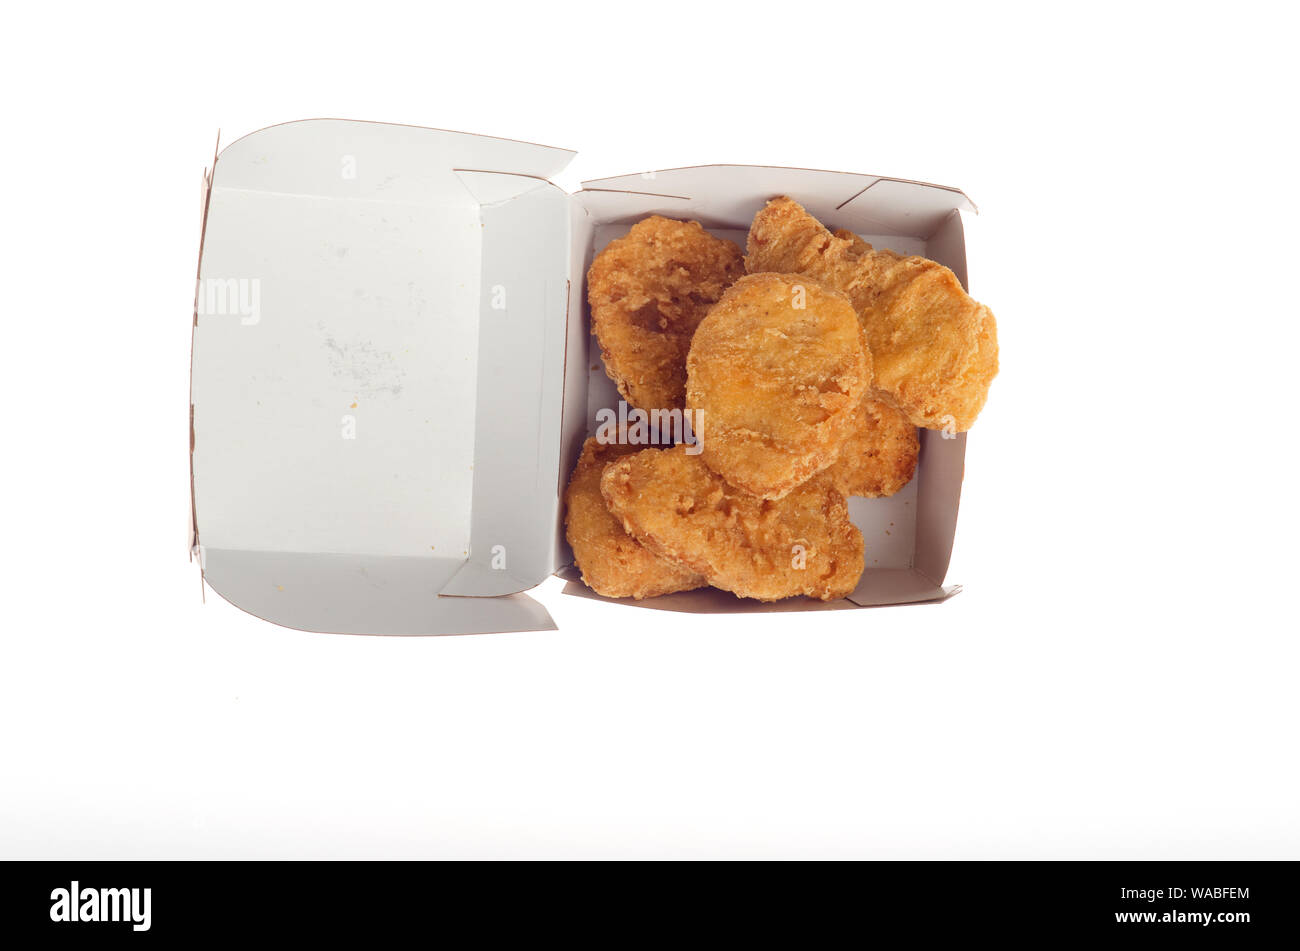 Mcdonalds Chicken Nuggets Box High Resolution Stock Photography and Images  - Alamy